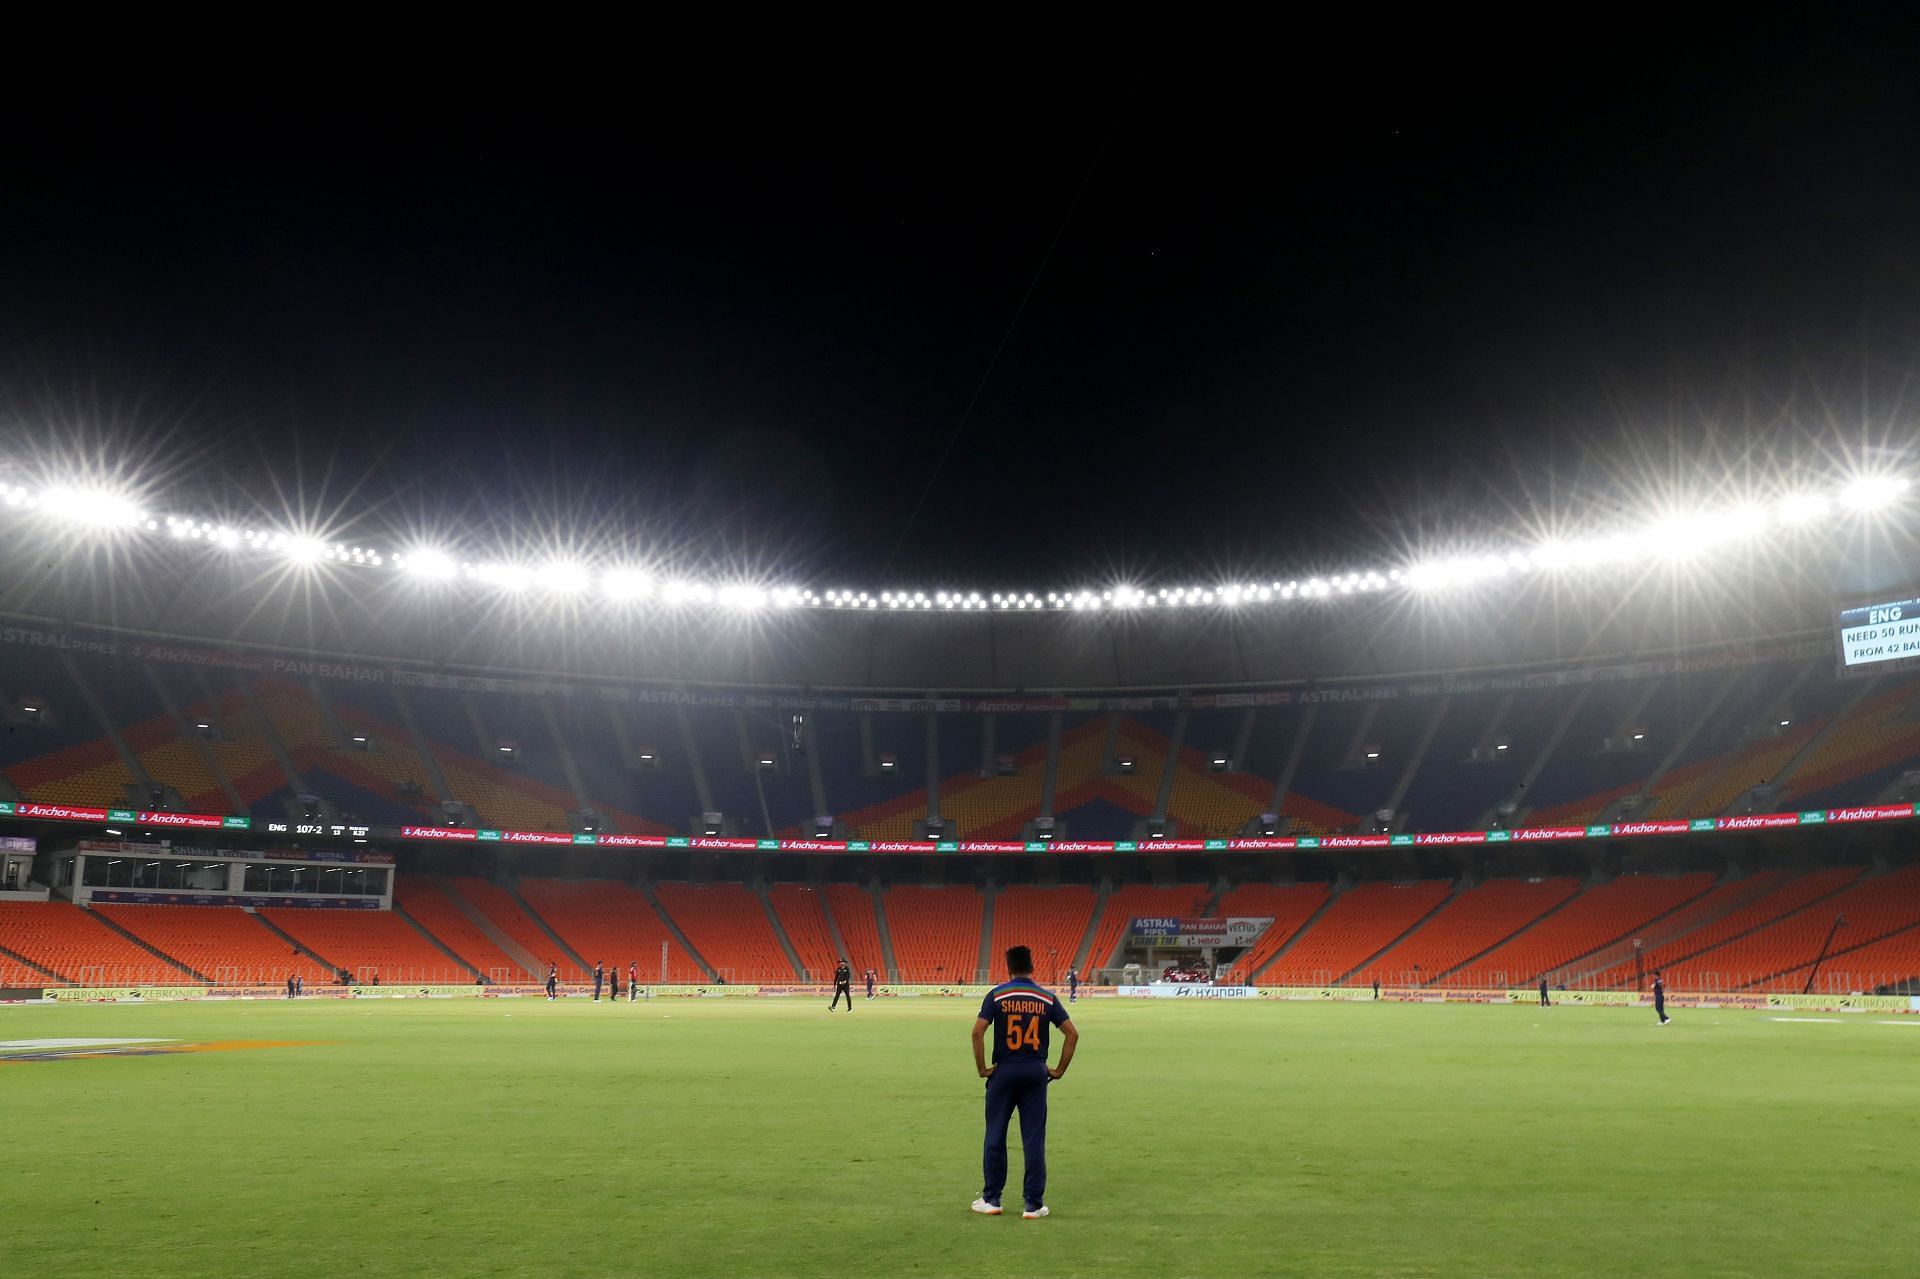 Ahmedabad is set to host the final of the ongoing edition. (Image Courtesy: iplt20.com)